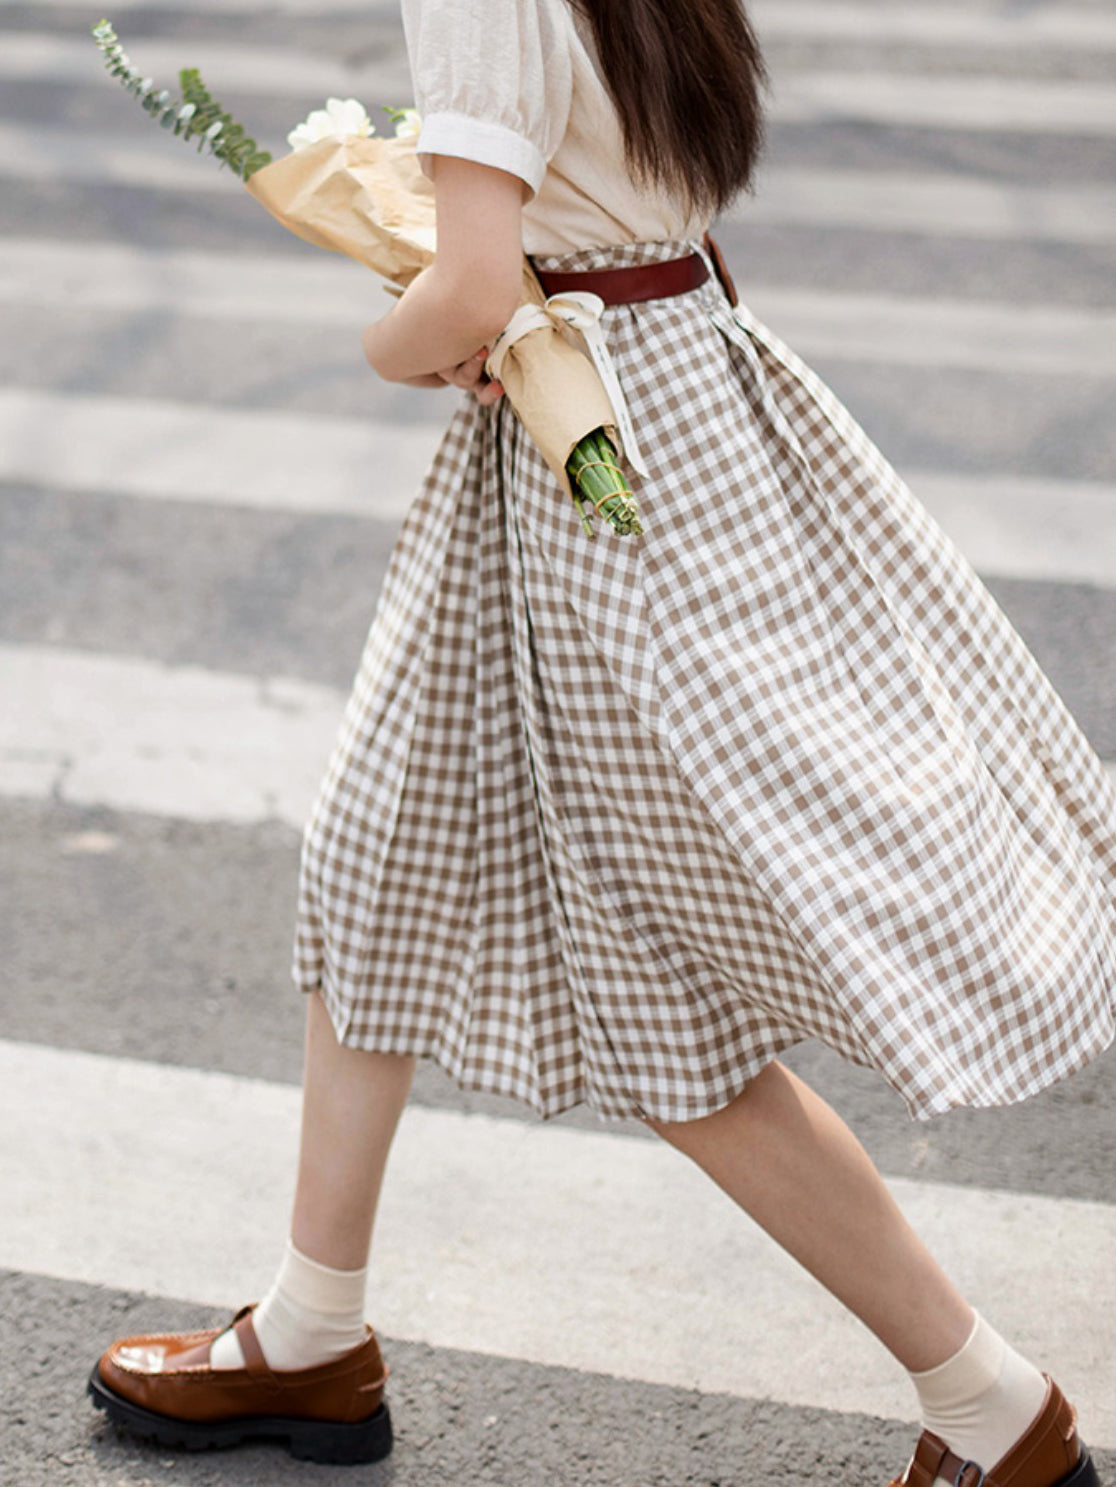 [Shipped within Japan, delivered within 1 week] western girl literary plaid skirt